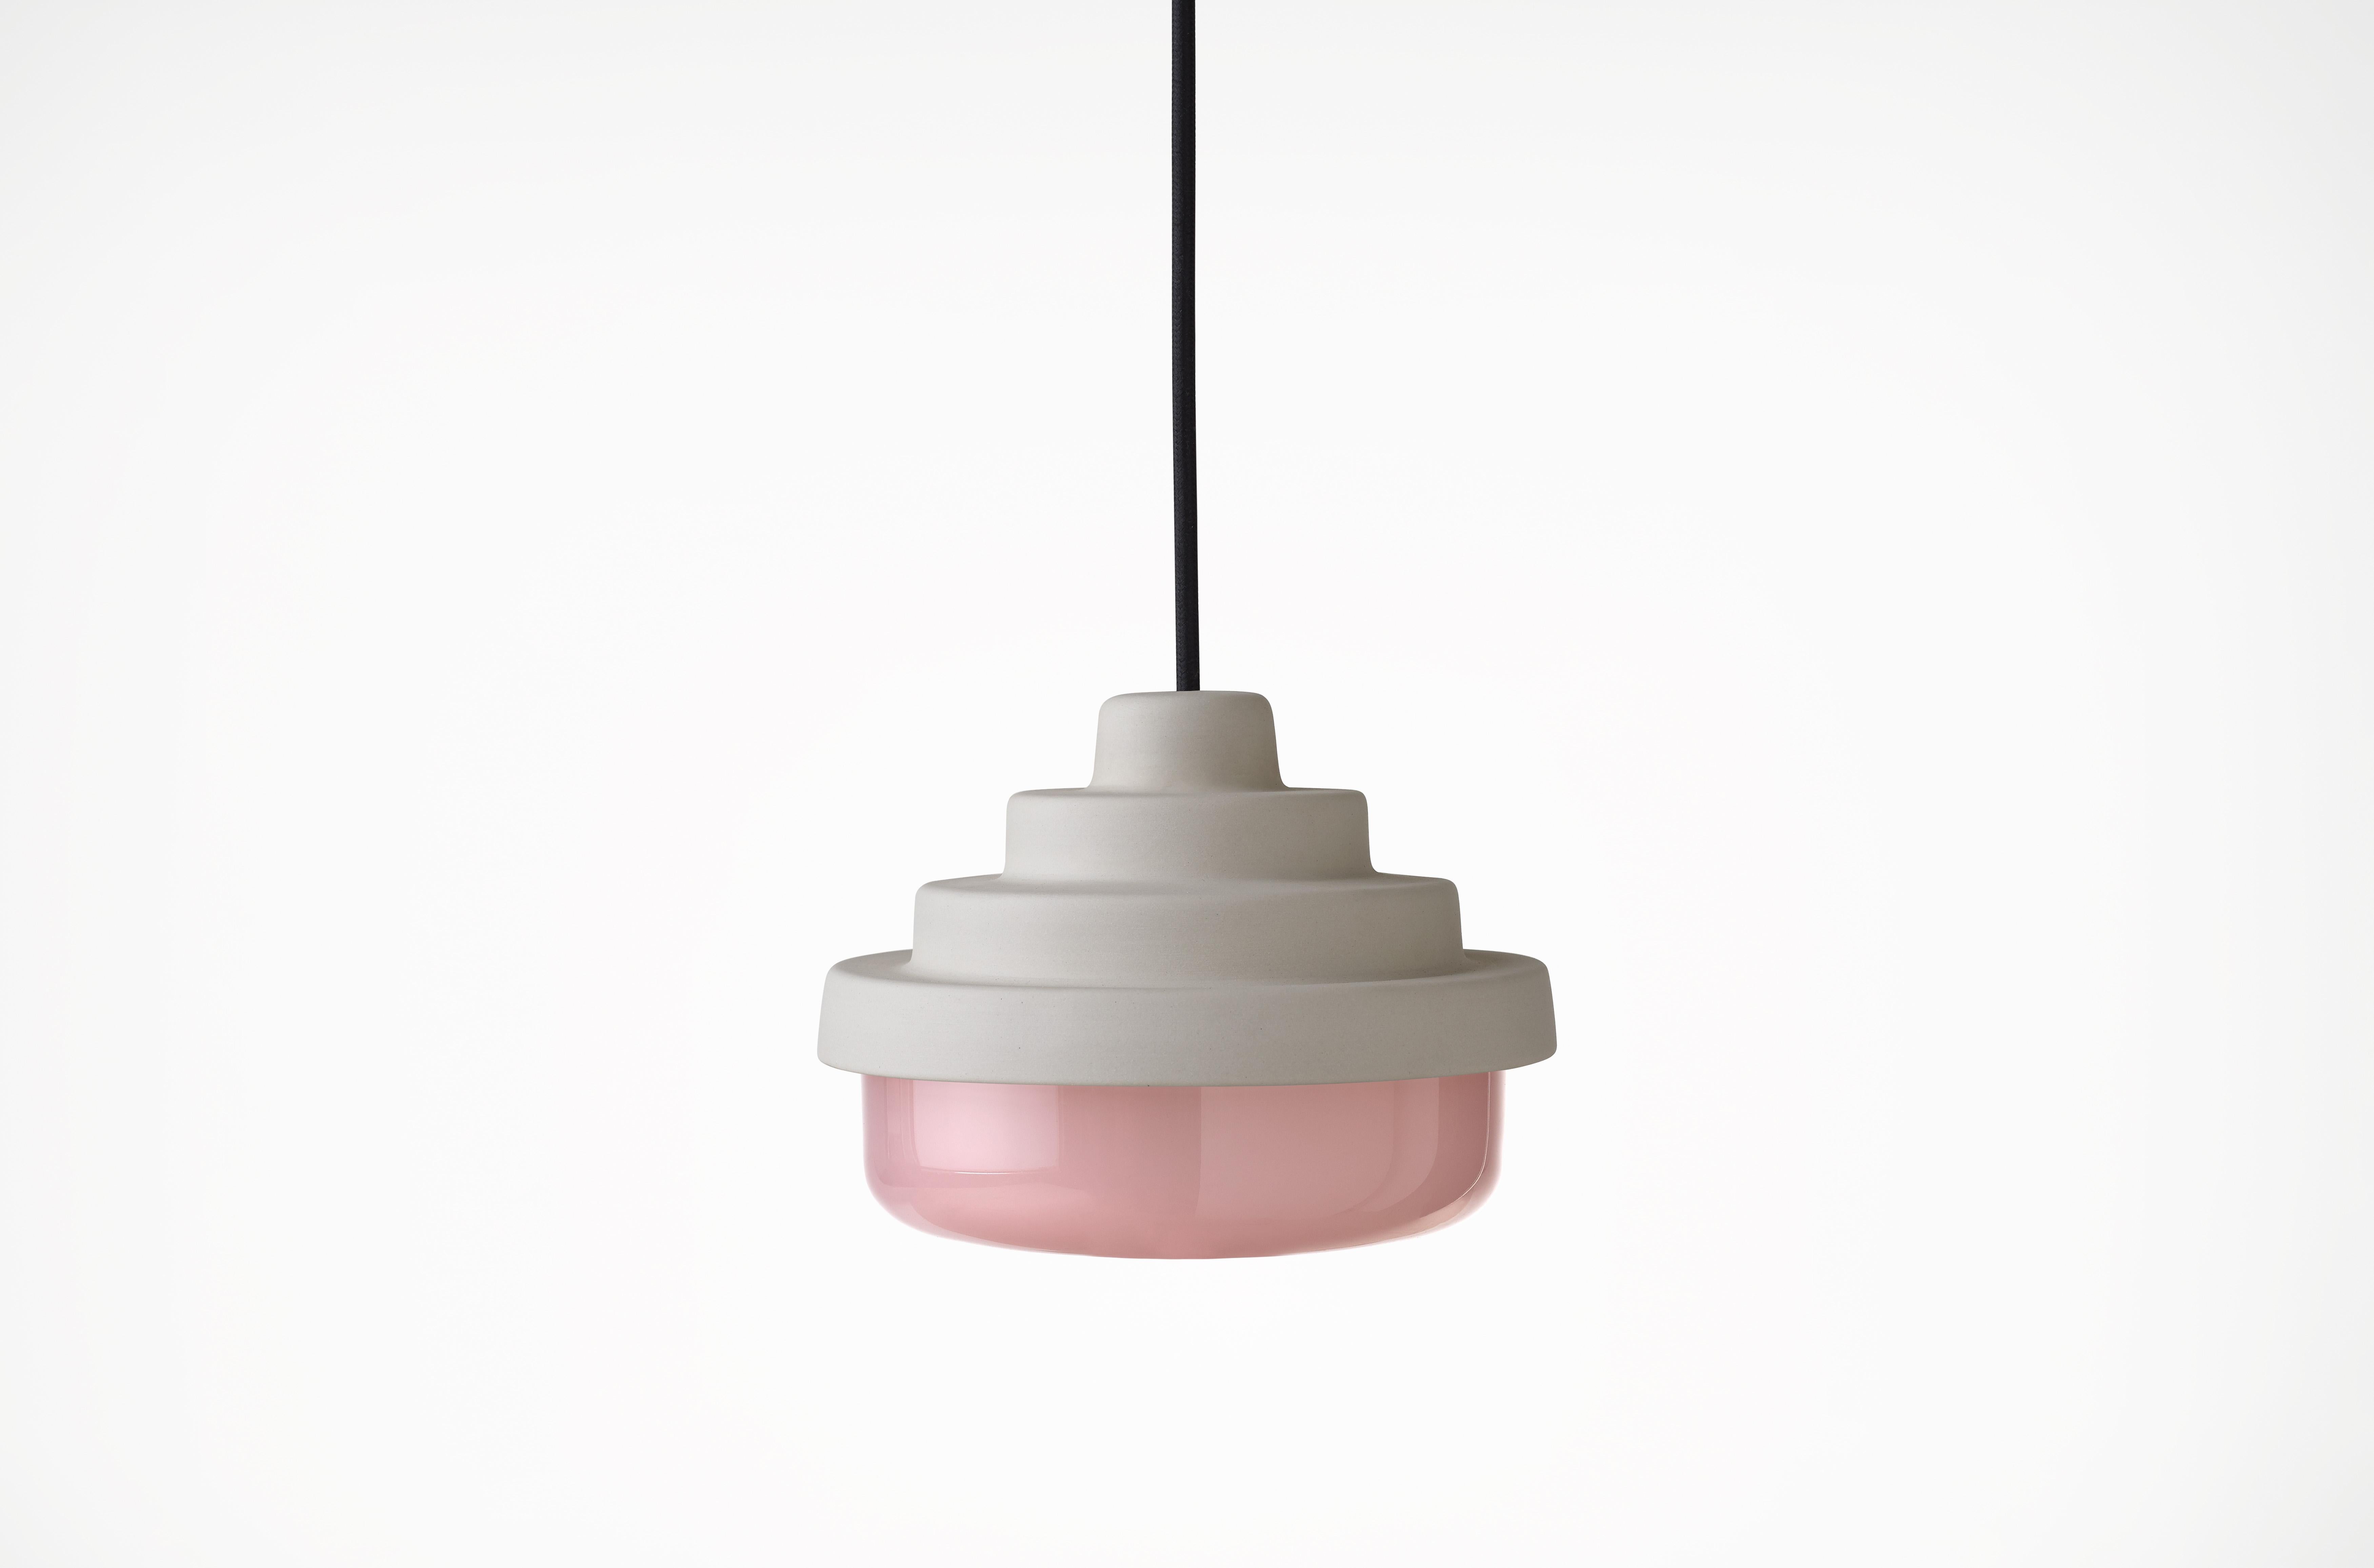 Raw and Pink Honey Pendant Light by Coco Flip
Dimensions: D 18 x W 18 x H 13 cm
Materials: Slip cast ceramic stoneware with blown glass. 
Weight: Approx. 2kg
Glass finishes: Pink.
Ceramic finishes: Raw unglazed stoneware. 

Standard fixtures